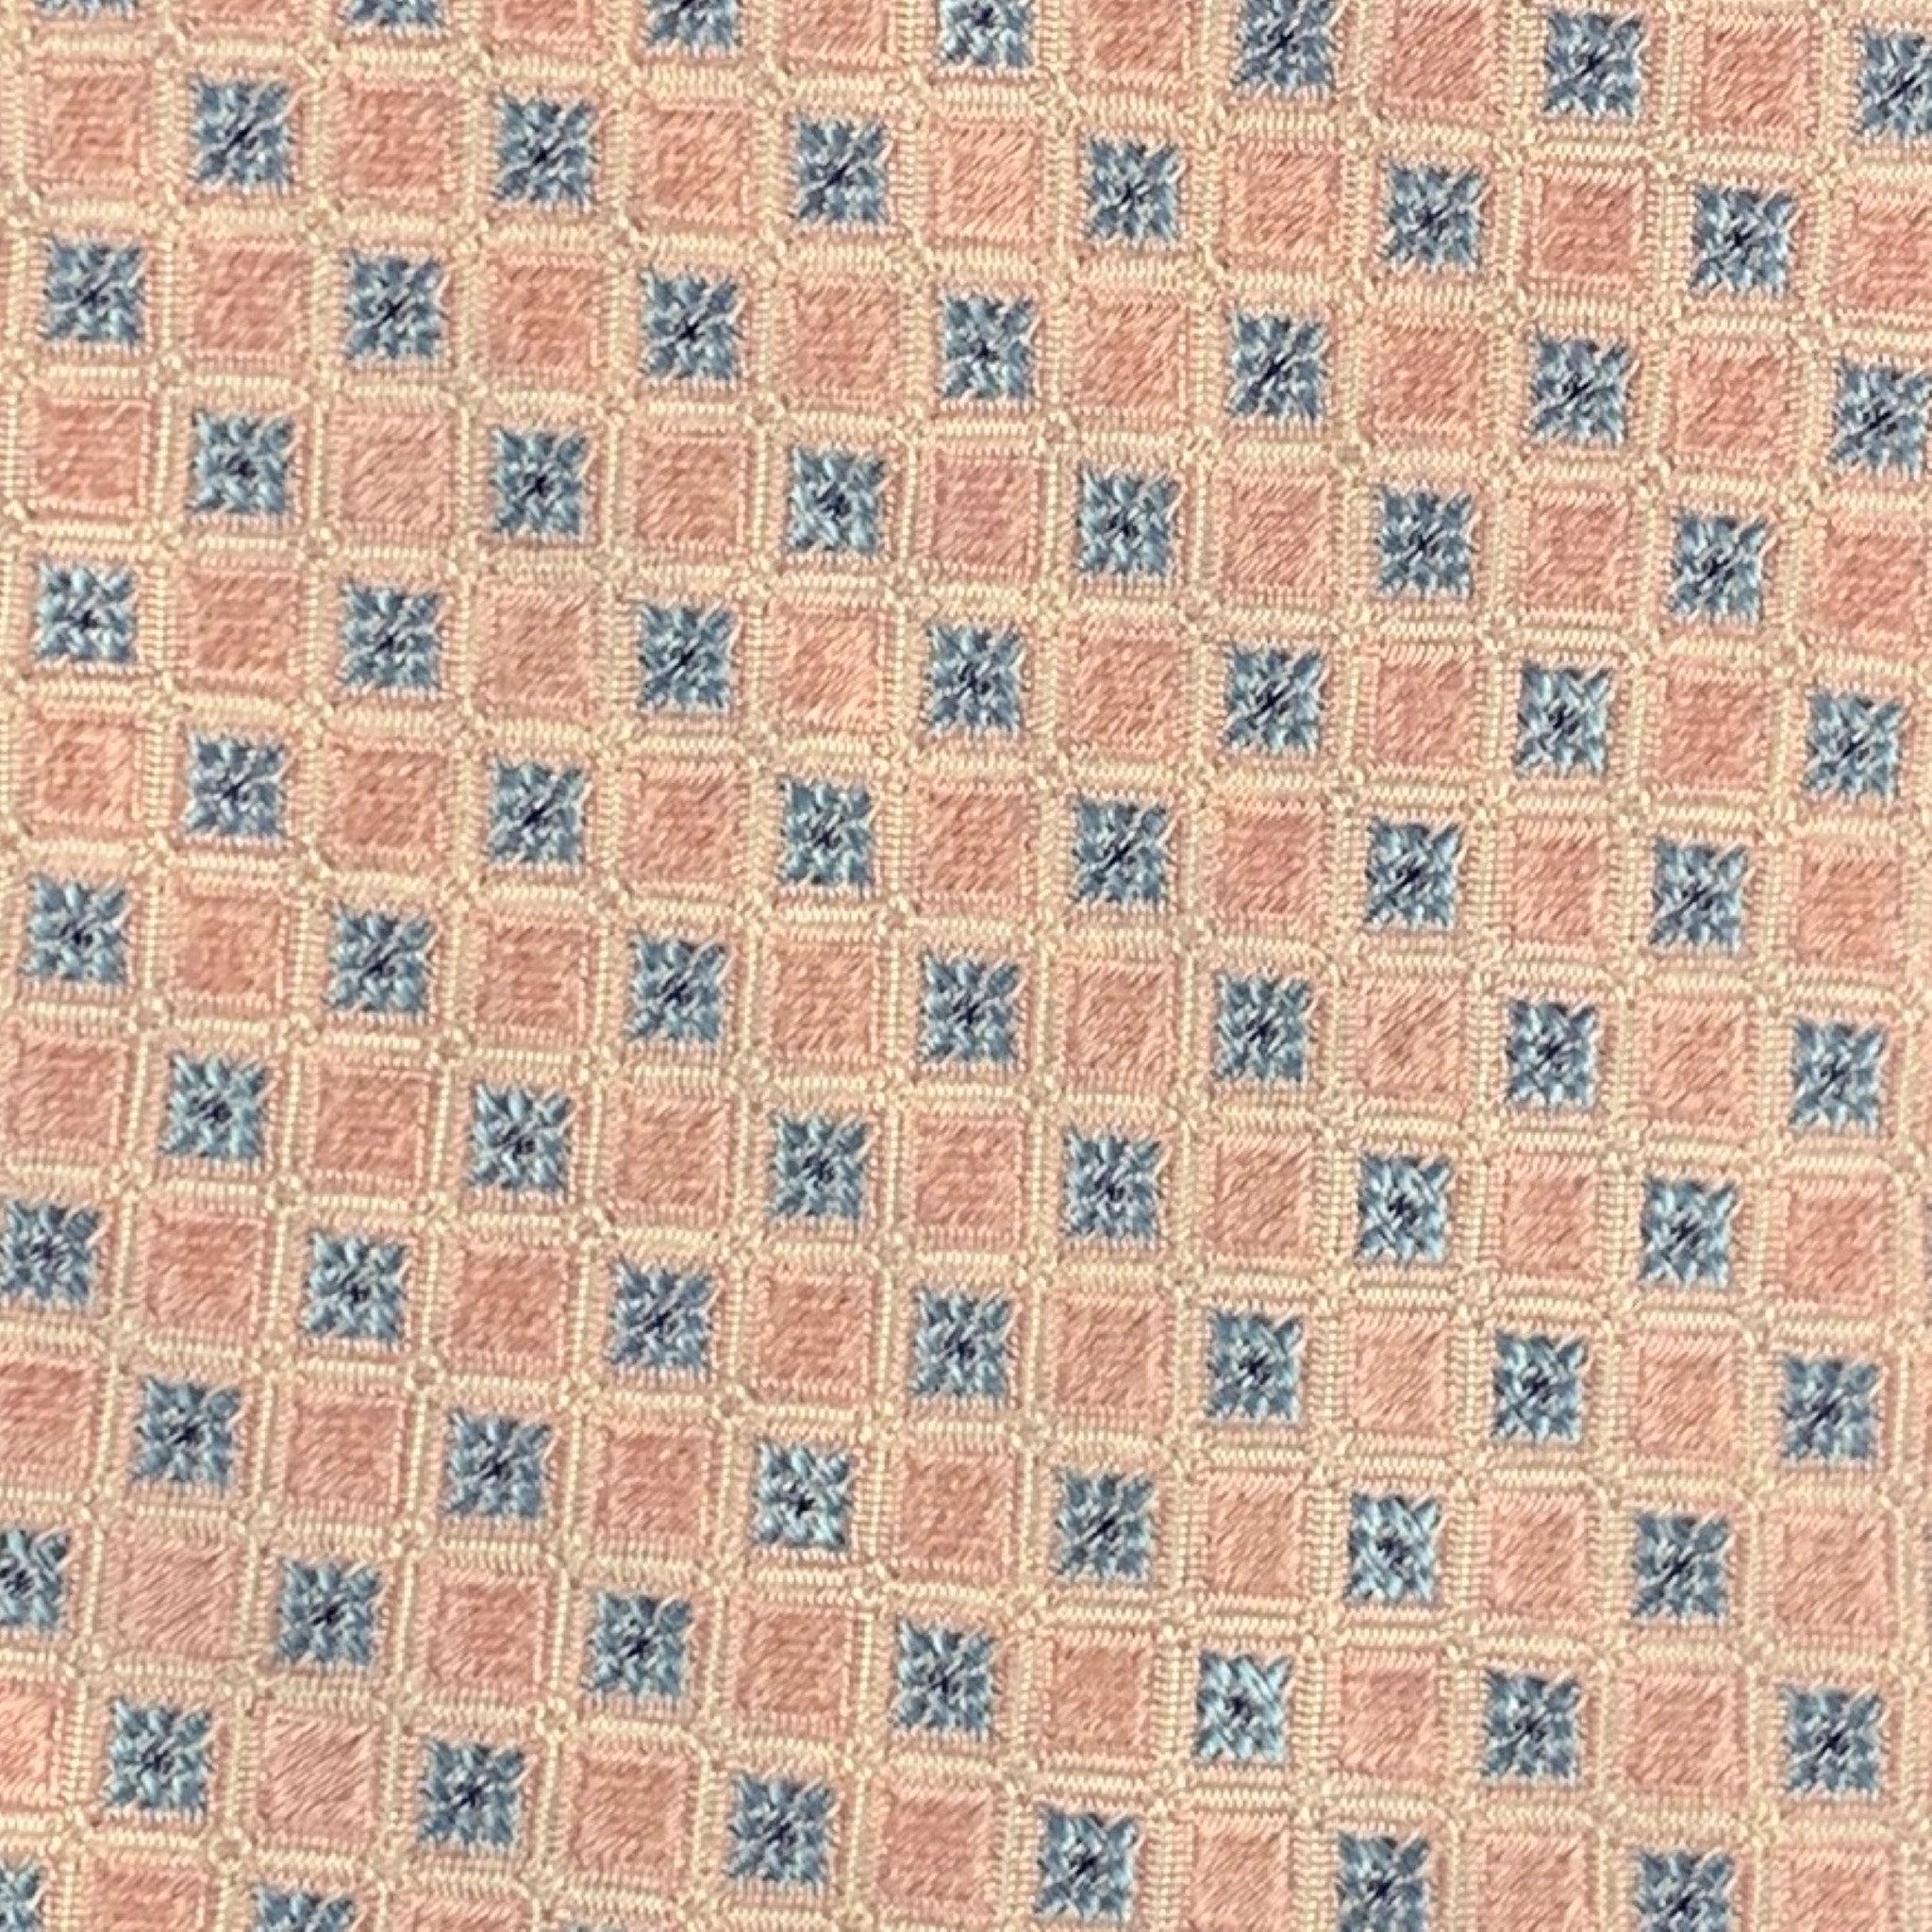 VALENTINO Pink Light Blue Squares Silk Tie In Good Condition For Sale In San Francisco, CA